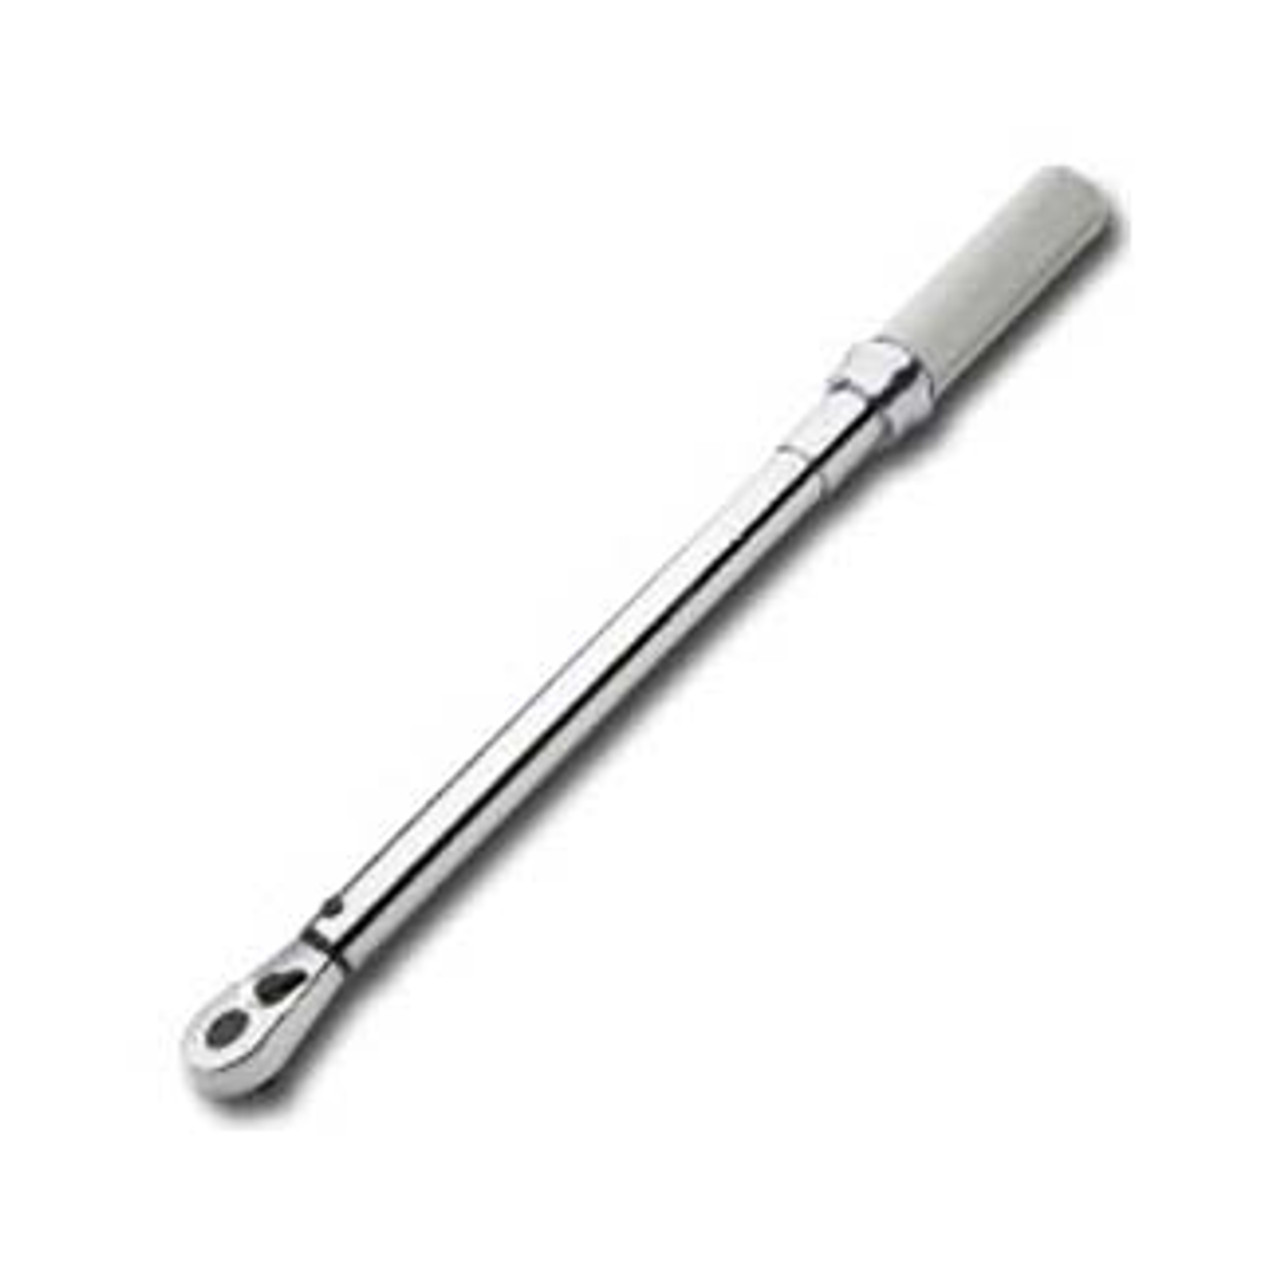 Micrometer click in torque wrench 1/2in  Dr. 30-250 ft./lbs. (1 ft./lb.)